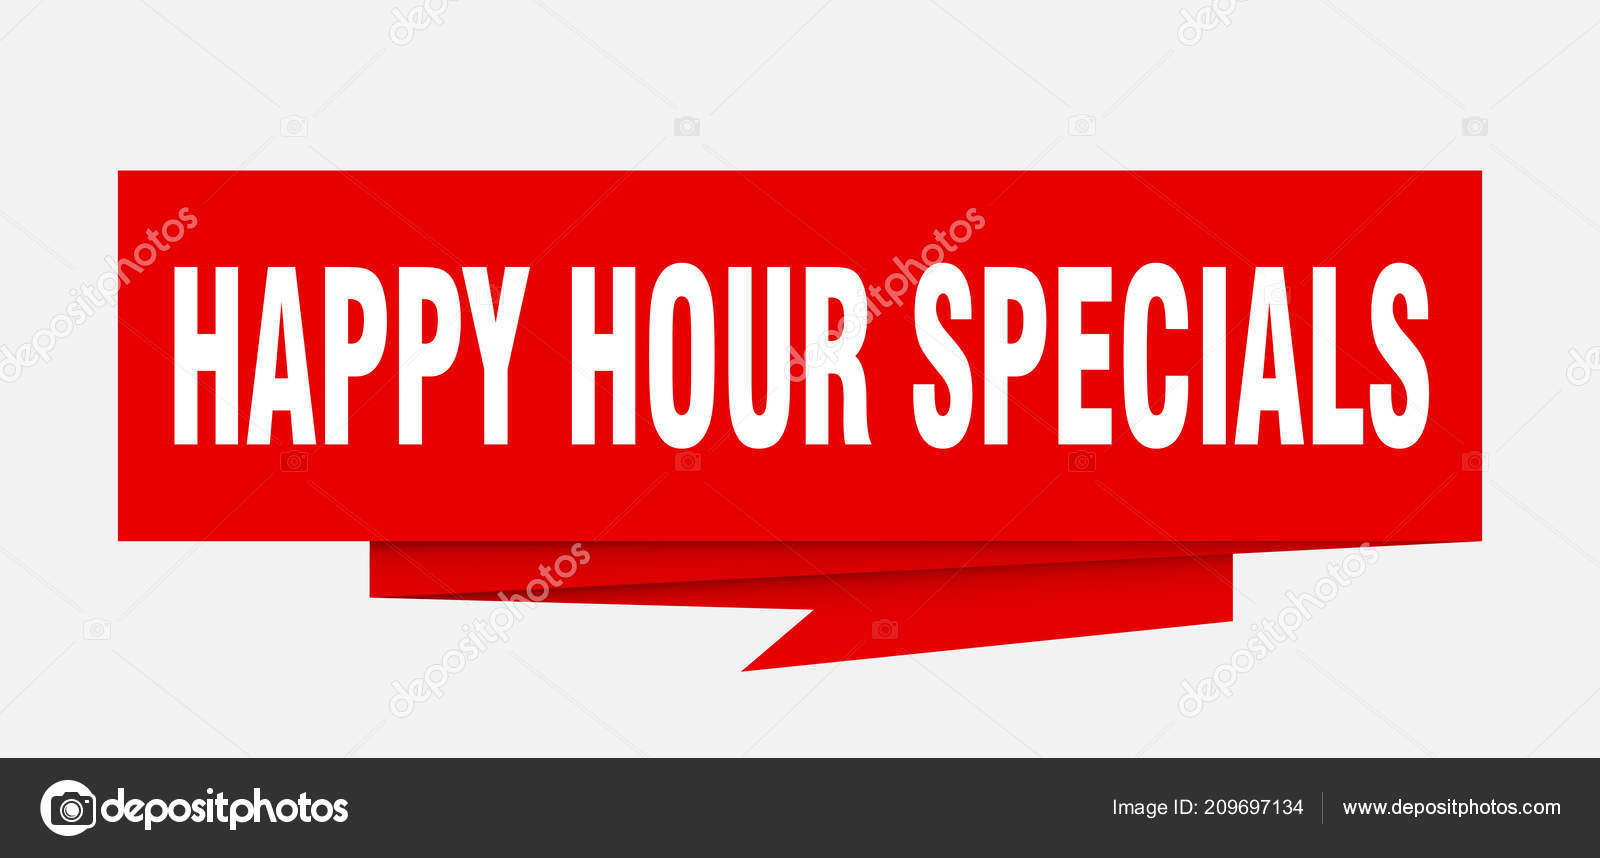 Origami Happy Hour Happy Hour Specials Sign Happy Hour Specials Paper Origami Speech